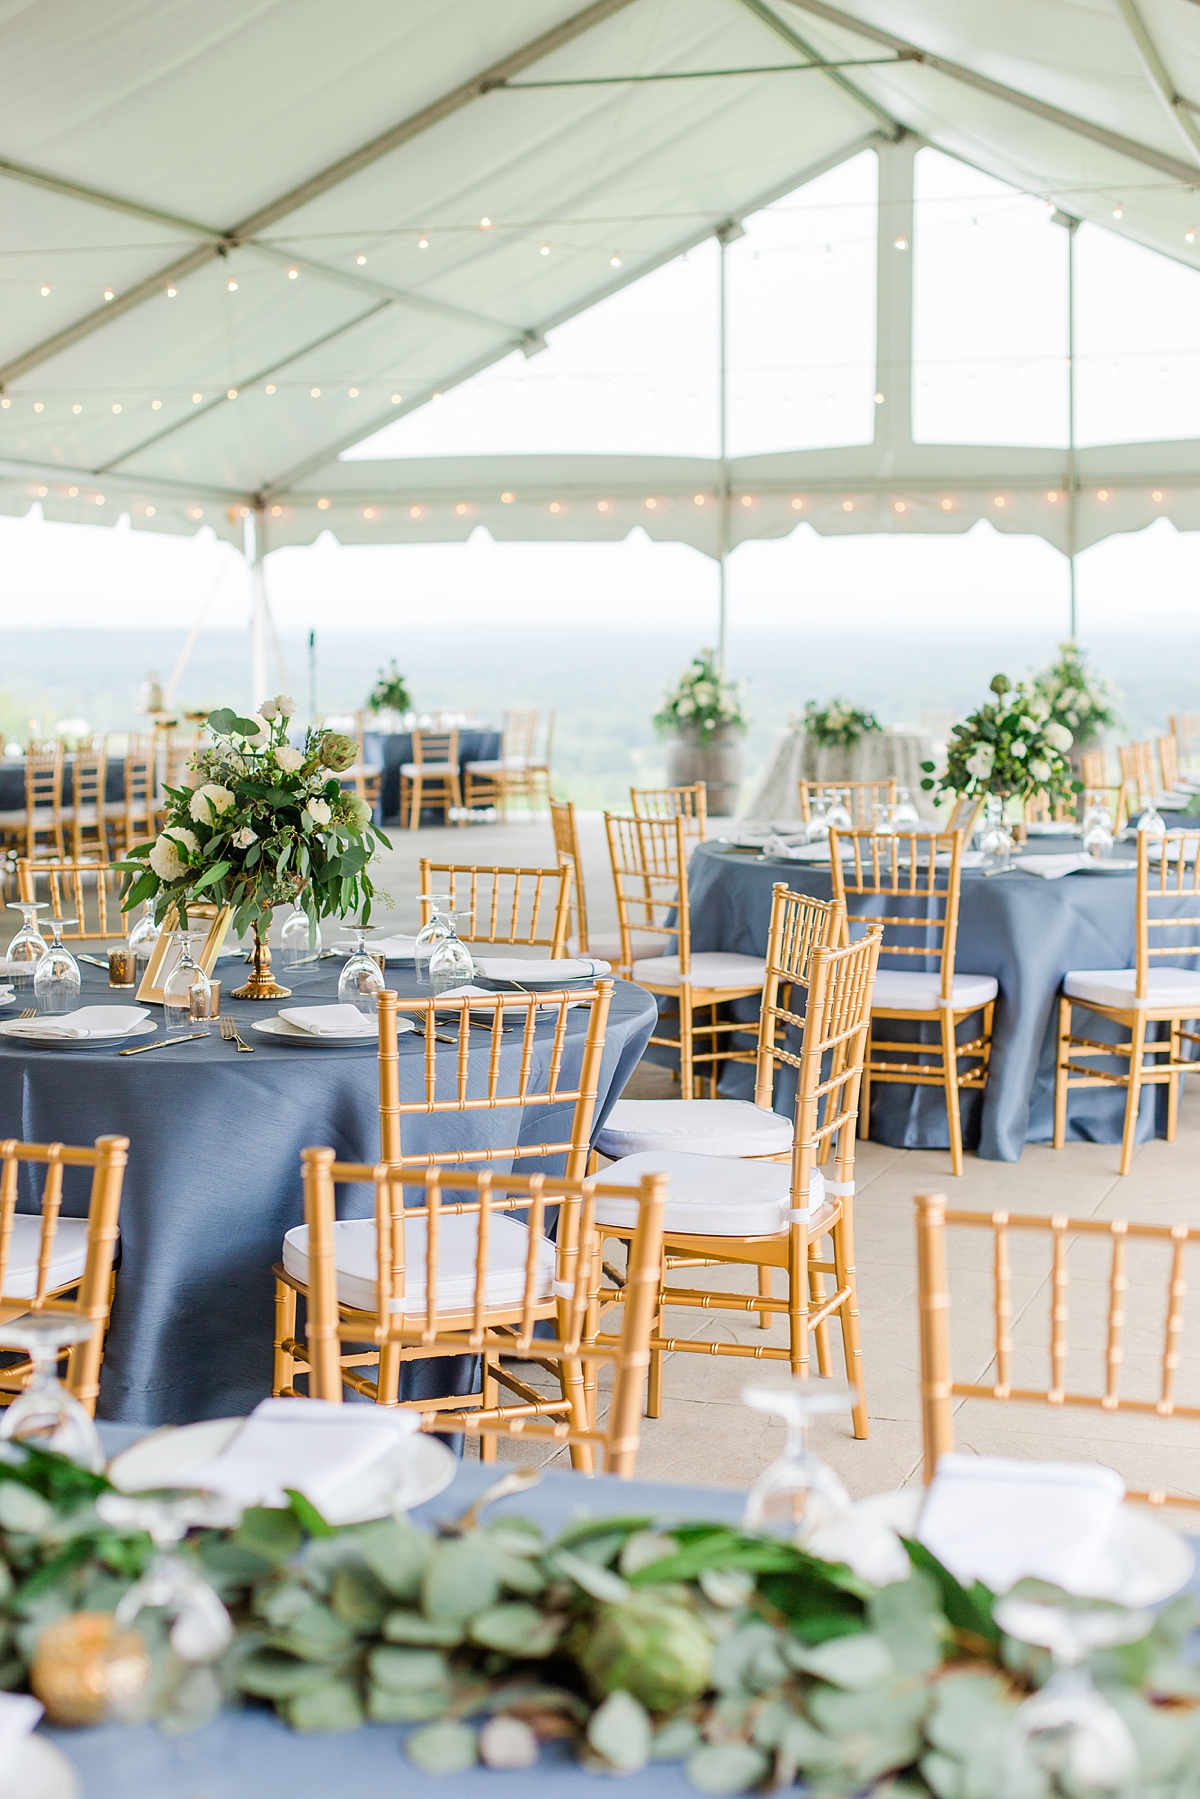 Classic Wedding Reception Decor with Mountain View at a Timeless Grace Estate Winery Wedding. Wedding Photography by Richmond Wedding Photographer Kailey Brianne Photography.